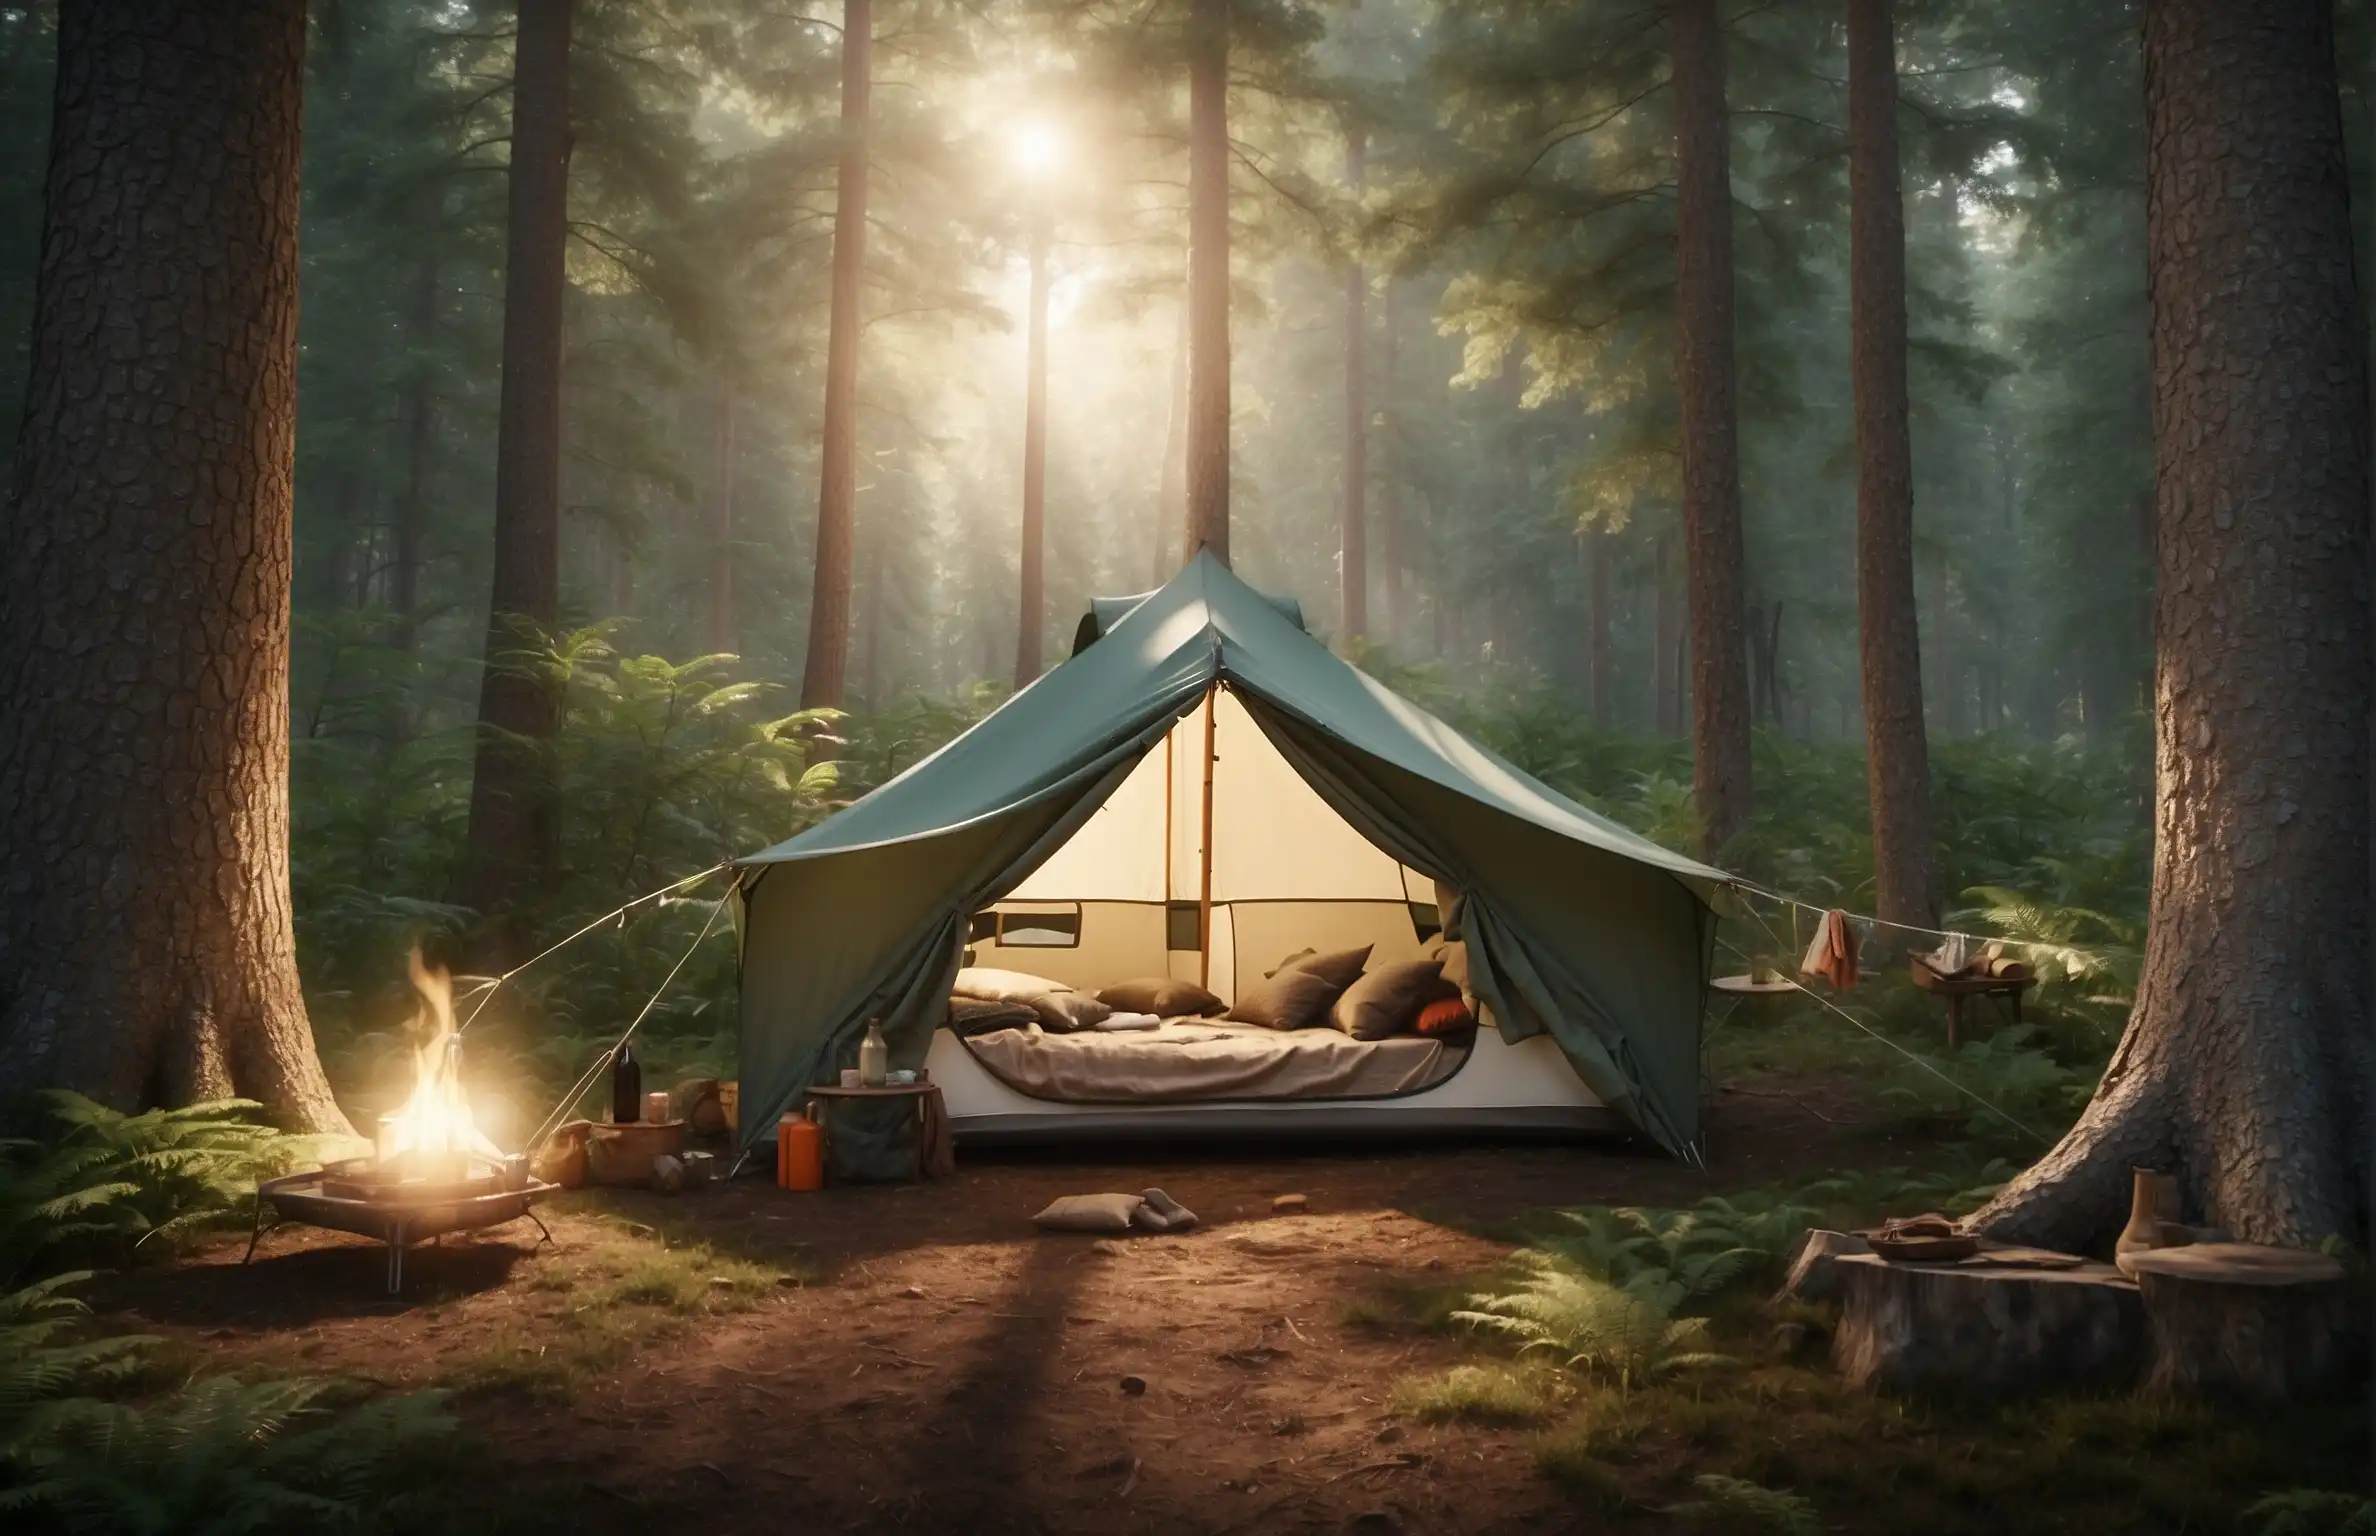 Stay Cool While Camping Without Electricity